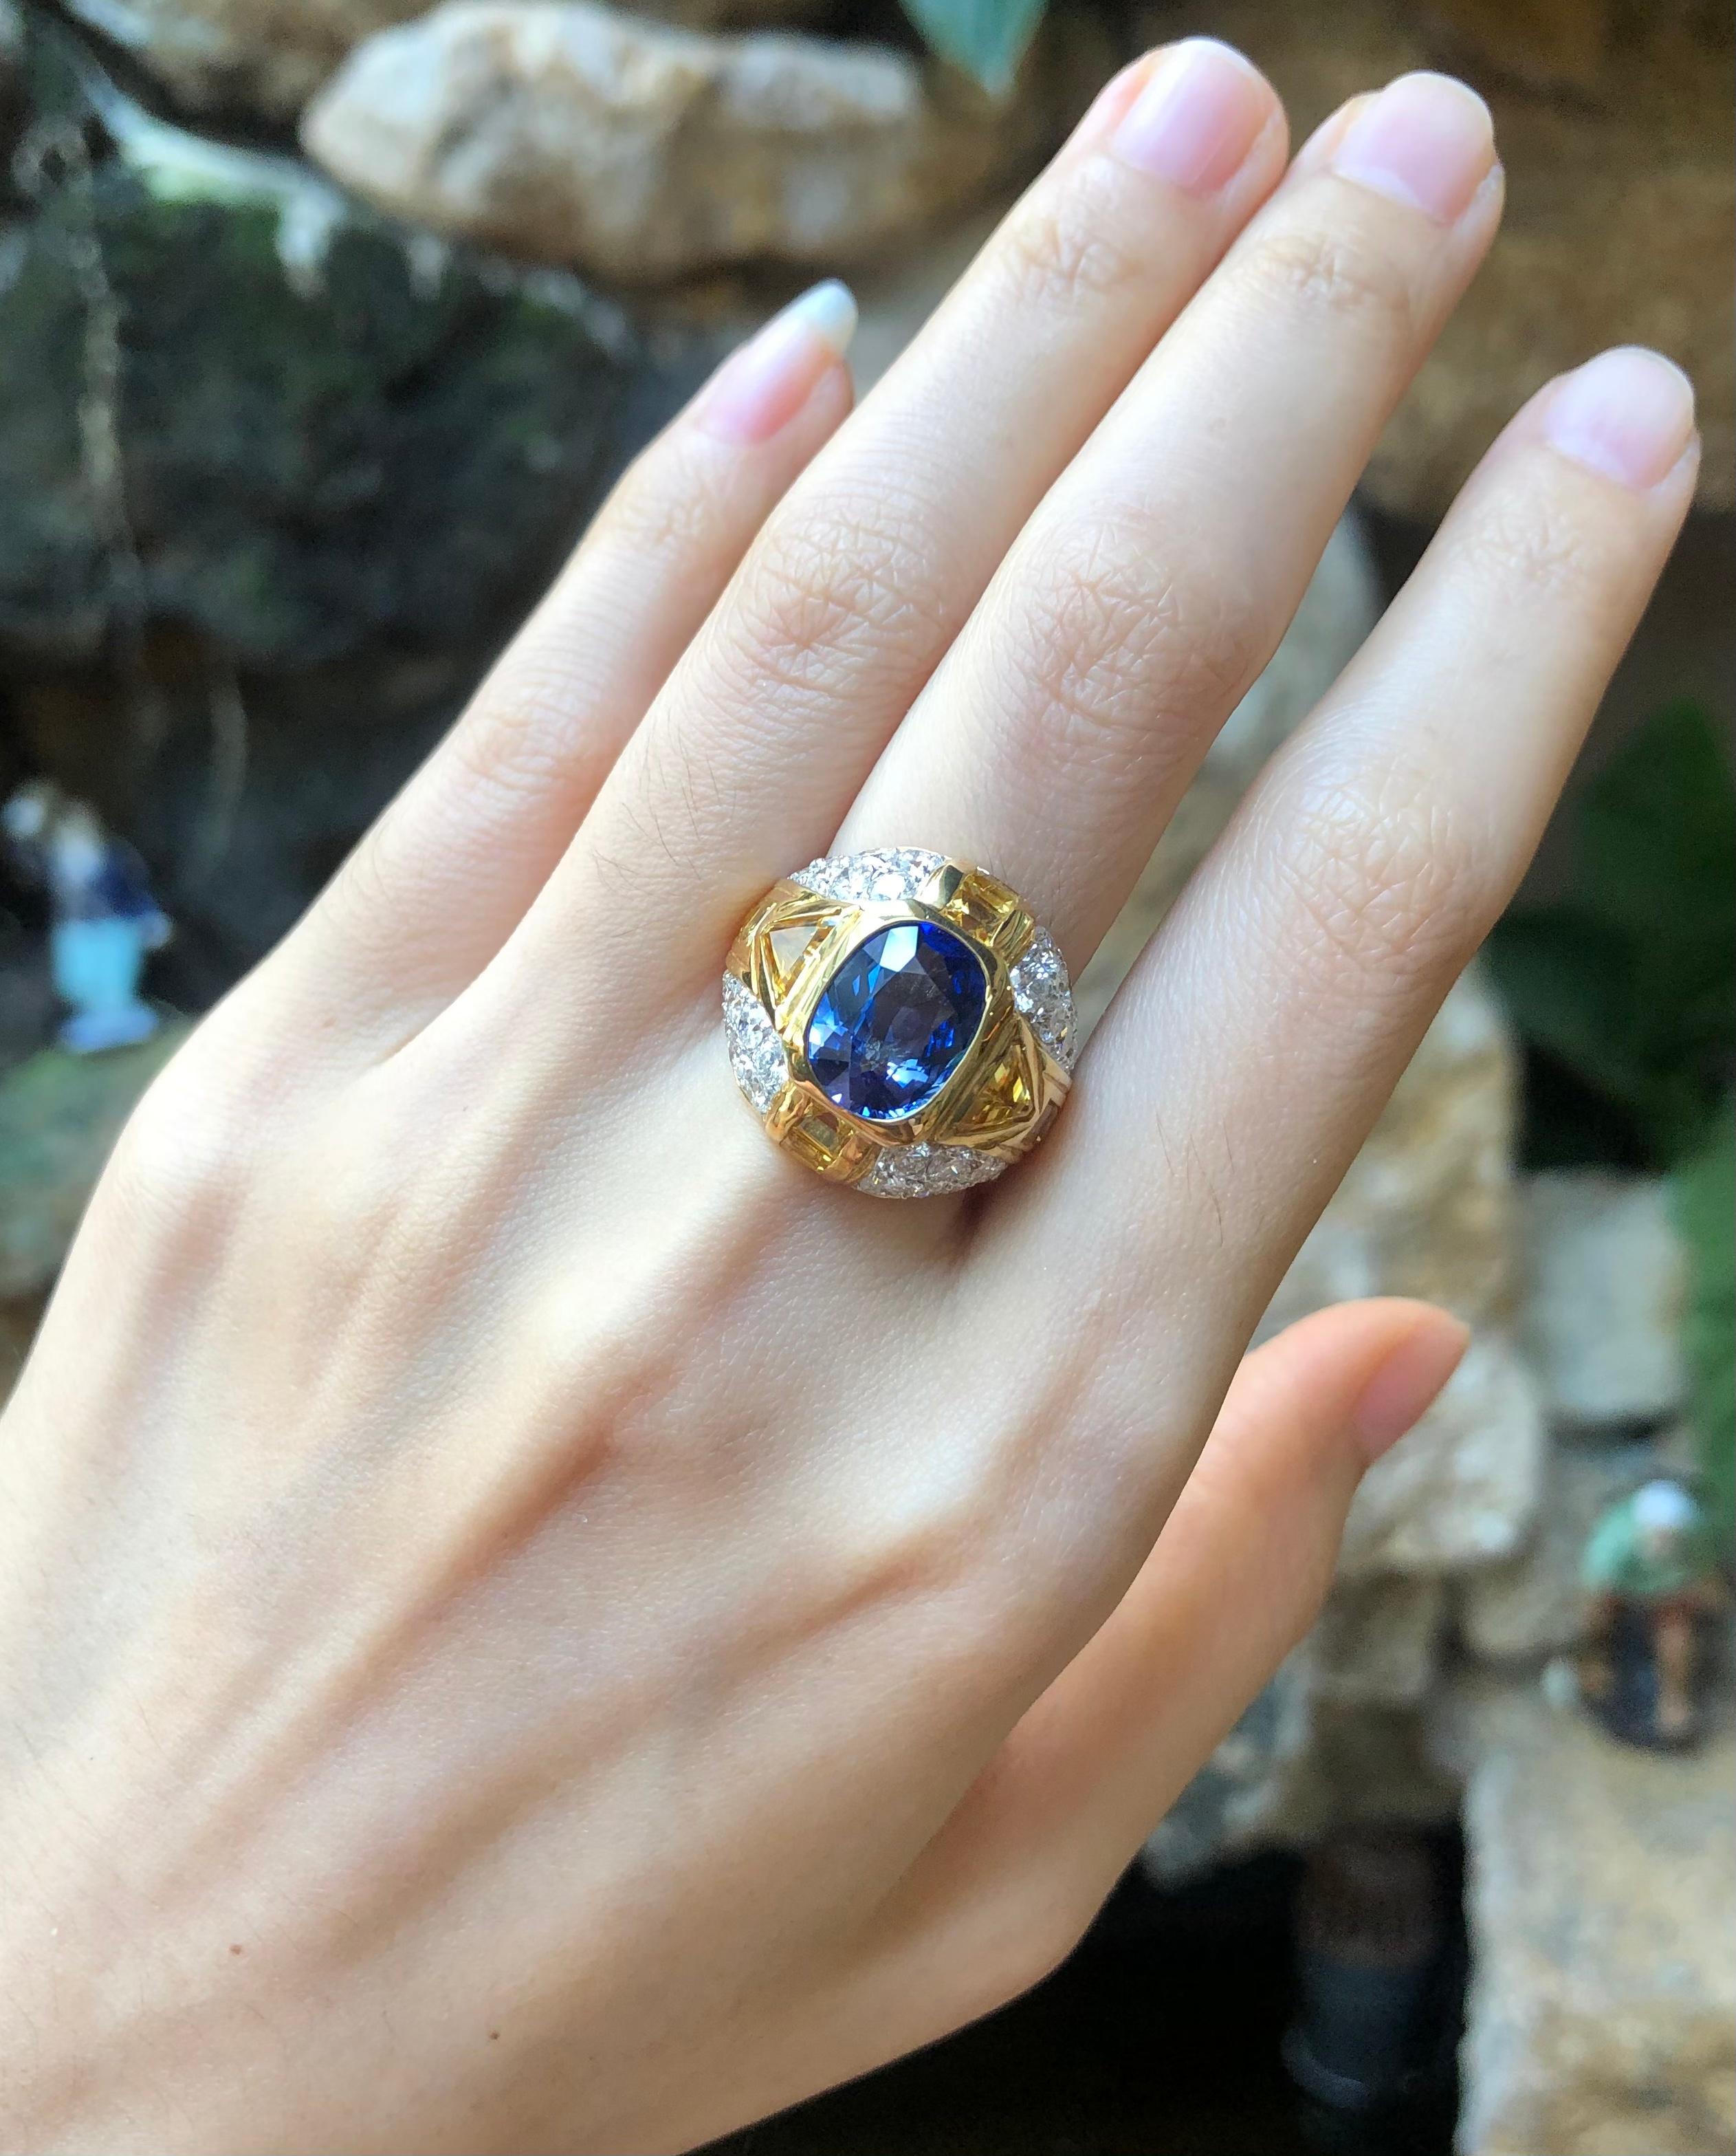 Blue Sapphire 4.68 carats with Yellow Sapphire 3.29 carats and Diamond 1.44 carats Ring set in 18 Karat Gold Settings

Width:  1.0 cm 
Length: 1.2 cm
Ring Size: 54
Total Weight: 13.45 grams

